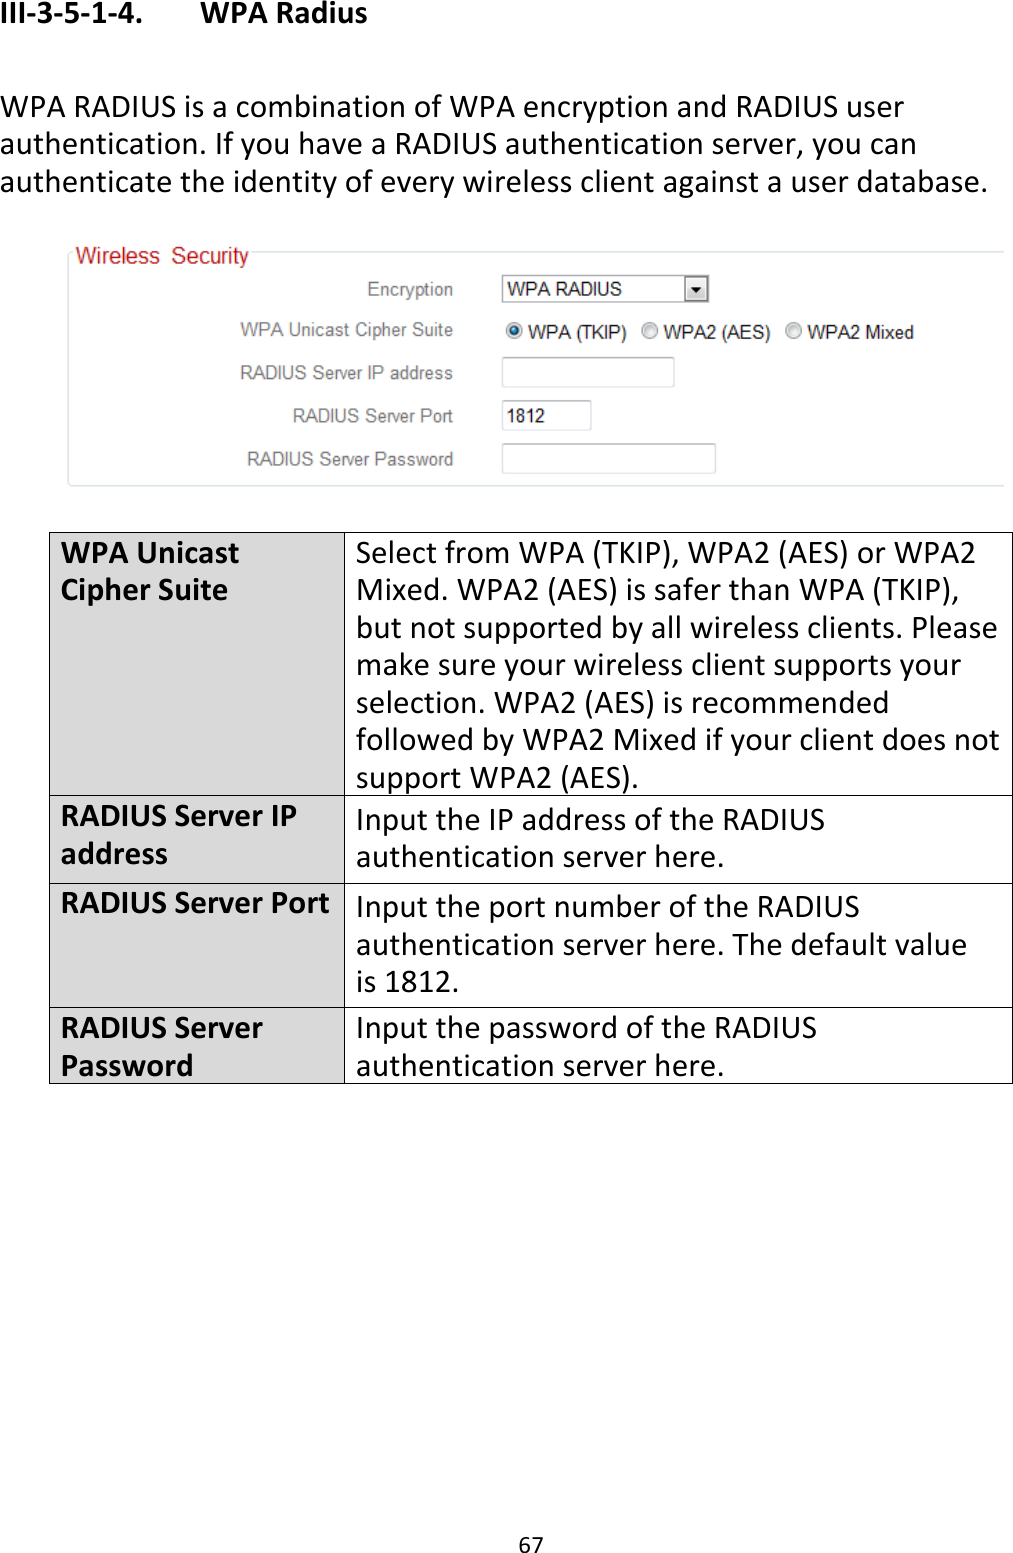 67 III-3-5-1-4.    WPA Radius  WPA RADIUS is a combination of WPA encryption and RADIUS user authentication. If you have a RADIUS authentication server, you can authenticate the identity of every wireless client against a user database.    WPA Unicast Cipher Suite Select from WPA (TKIP), WPA2 (AES) or WPA2 Mixed. WPA2 (AES) is safer than WPA (TKIP), but not supported by all wireless clients. Please make sure your wireless client supports your selection. WPA2 (AES) is recommended followed by WPA2 Mixed if your client does not support WPA2 (AES). RADIUS Server IP address Input the IP address of the RADIUS authentication server here. RADIUS Server Port Input the port number of the RADIUS authentication server here. The default value is 1812. RADIUS Server Password Input the password of the RADIUS authentication server here.  